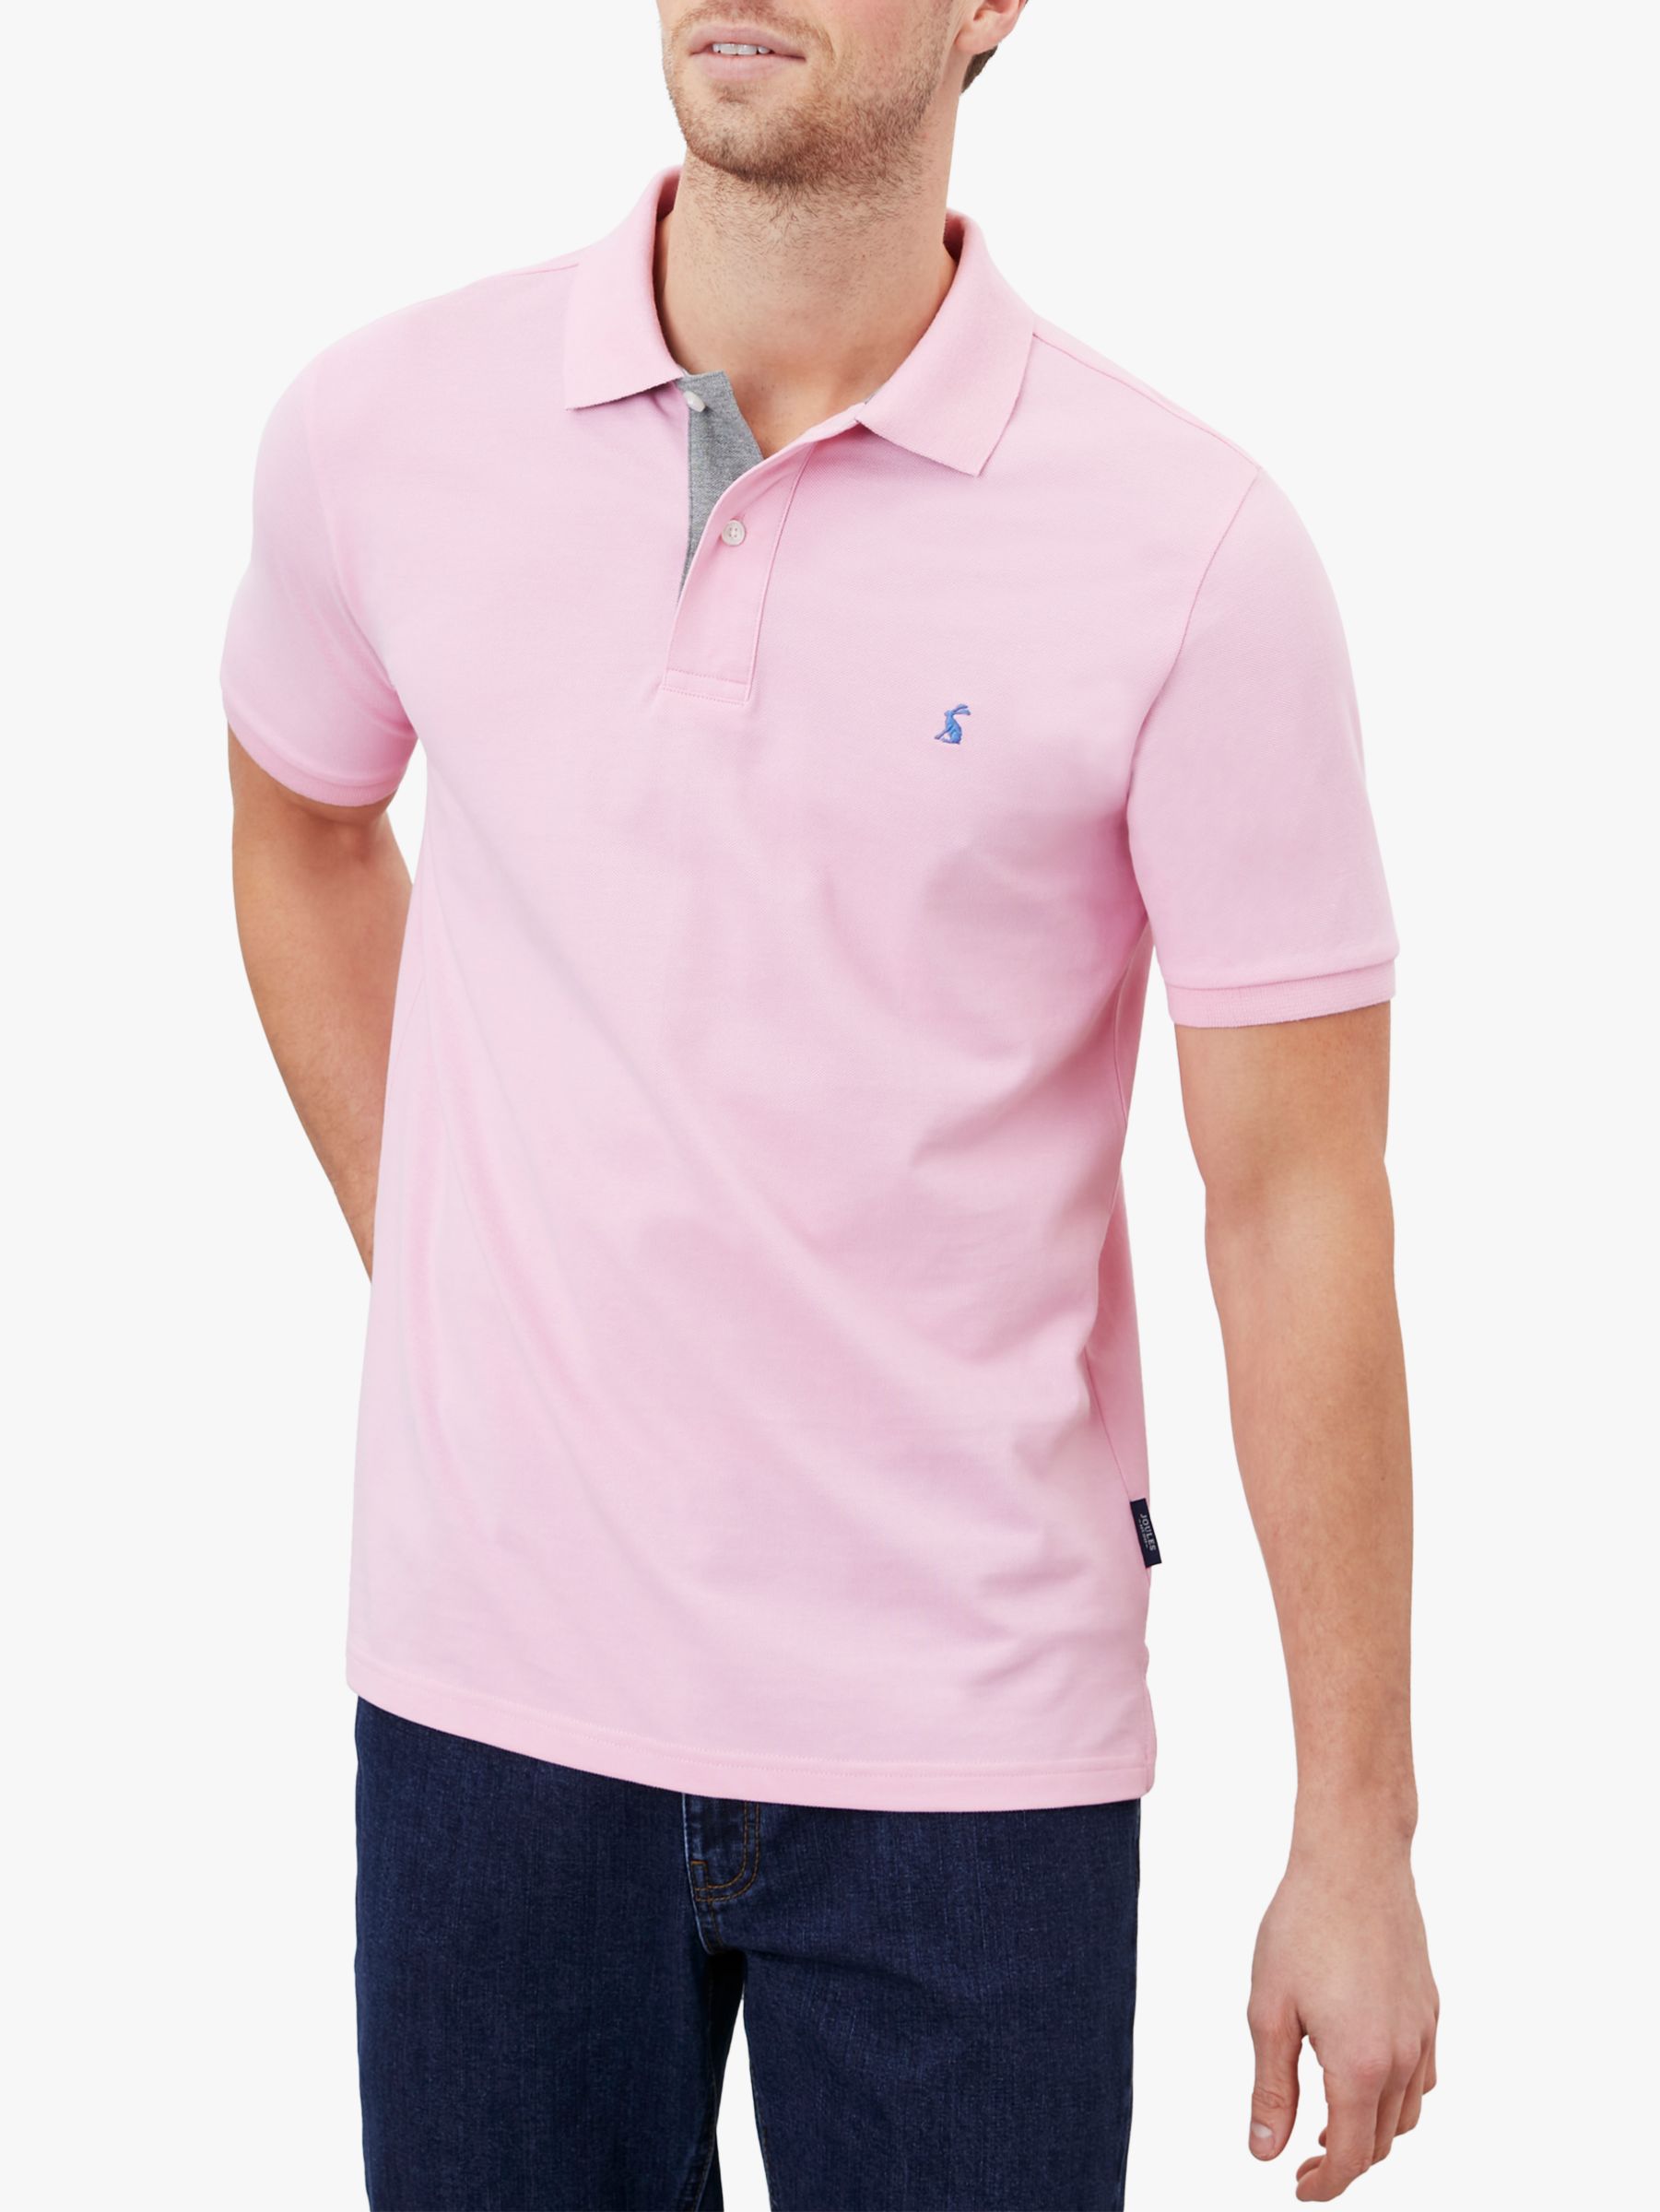 Joules Classic Fit Polo Shirt, Light Pink at John Lewis & Partners